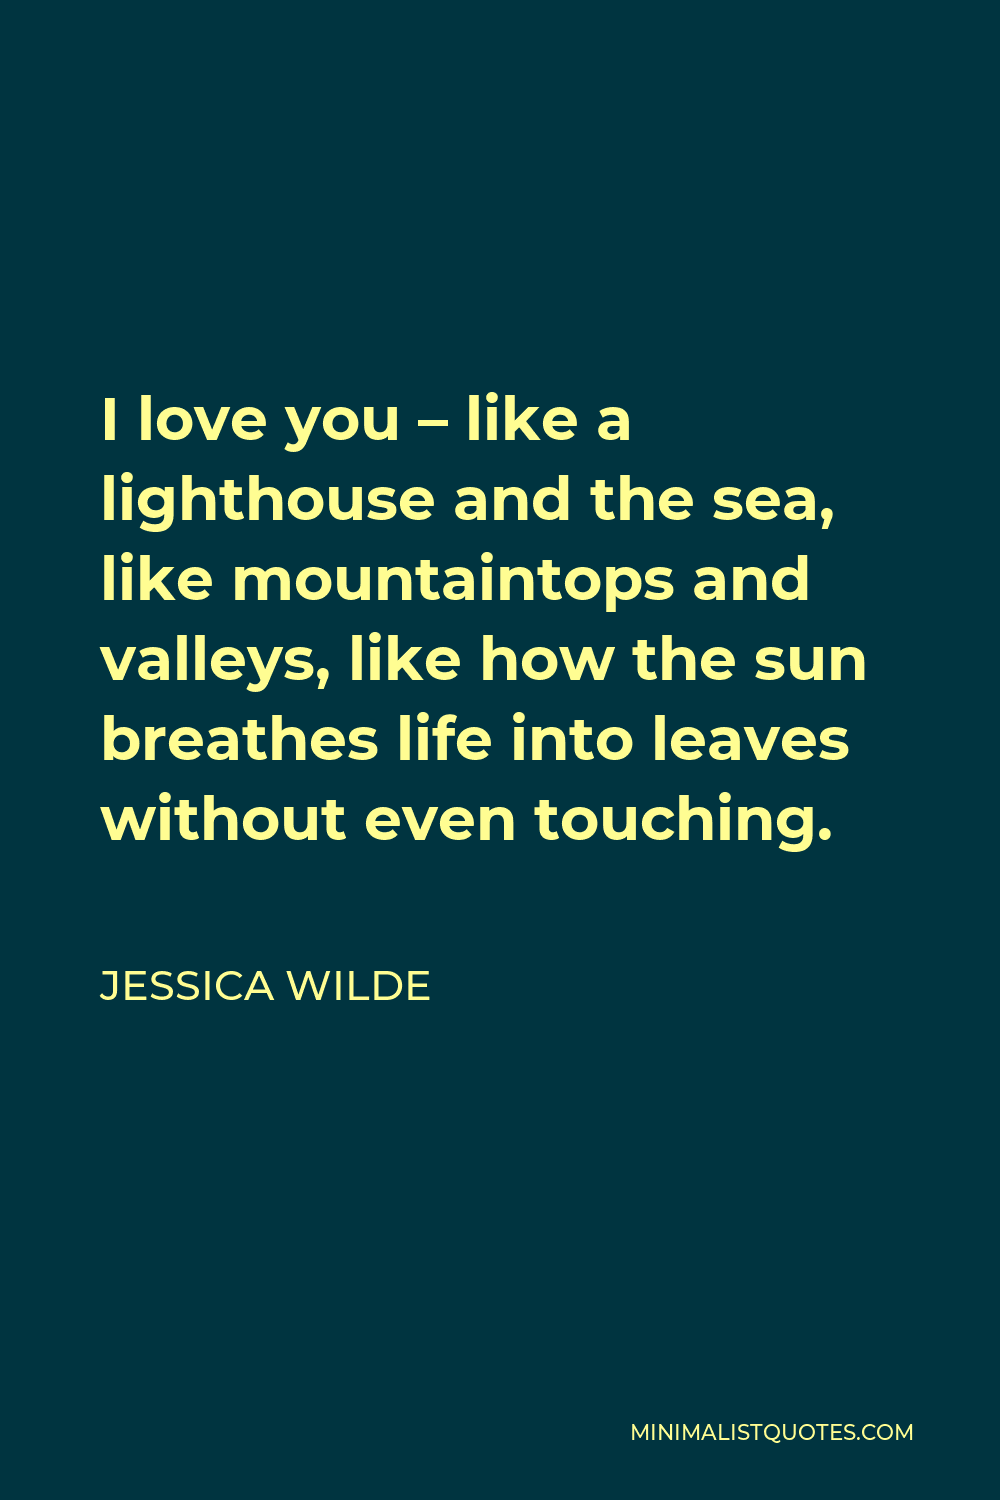 Jessica Wilde Quote - I love you – like a lighthouse and the sea, like mountaintops and valleys, like how the sun breathes life into leaves without even touching.